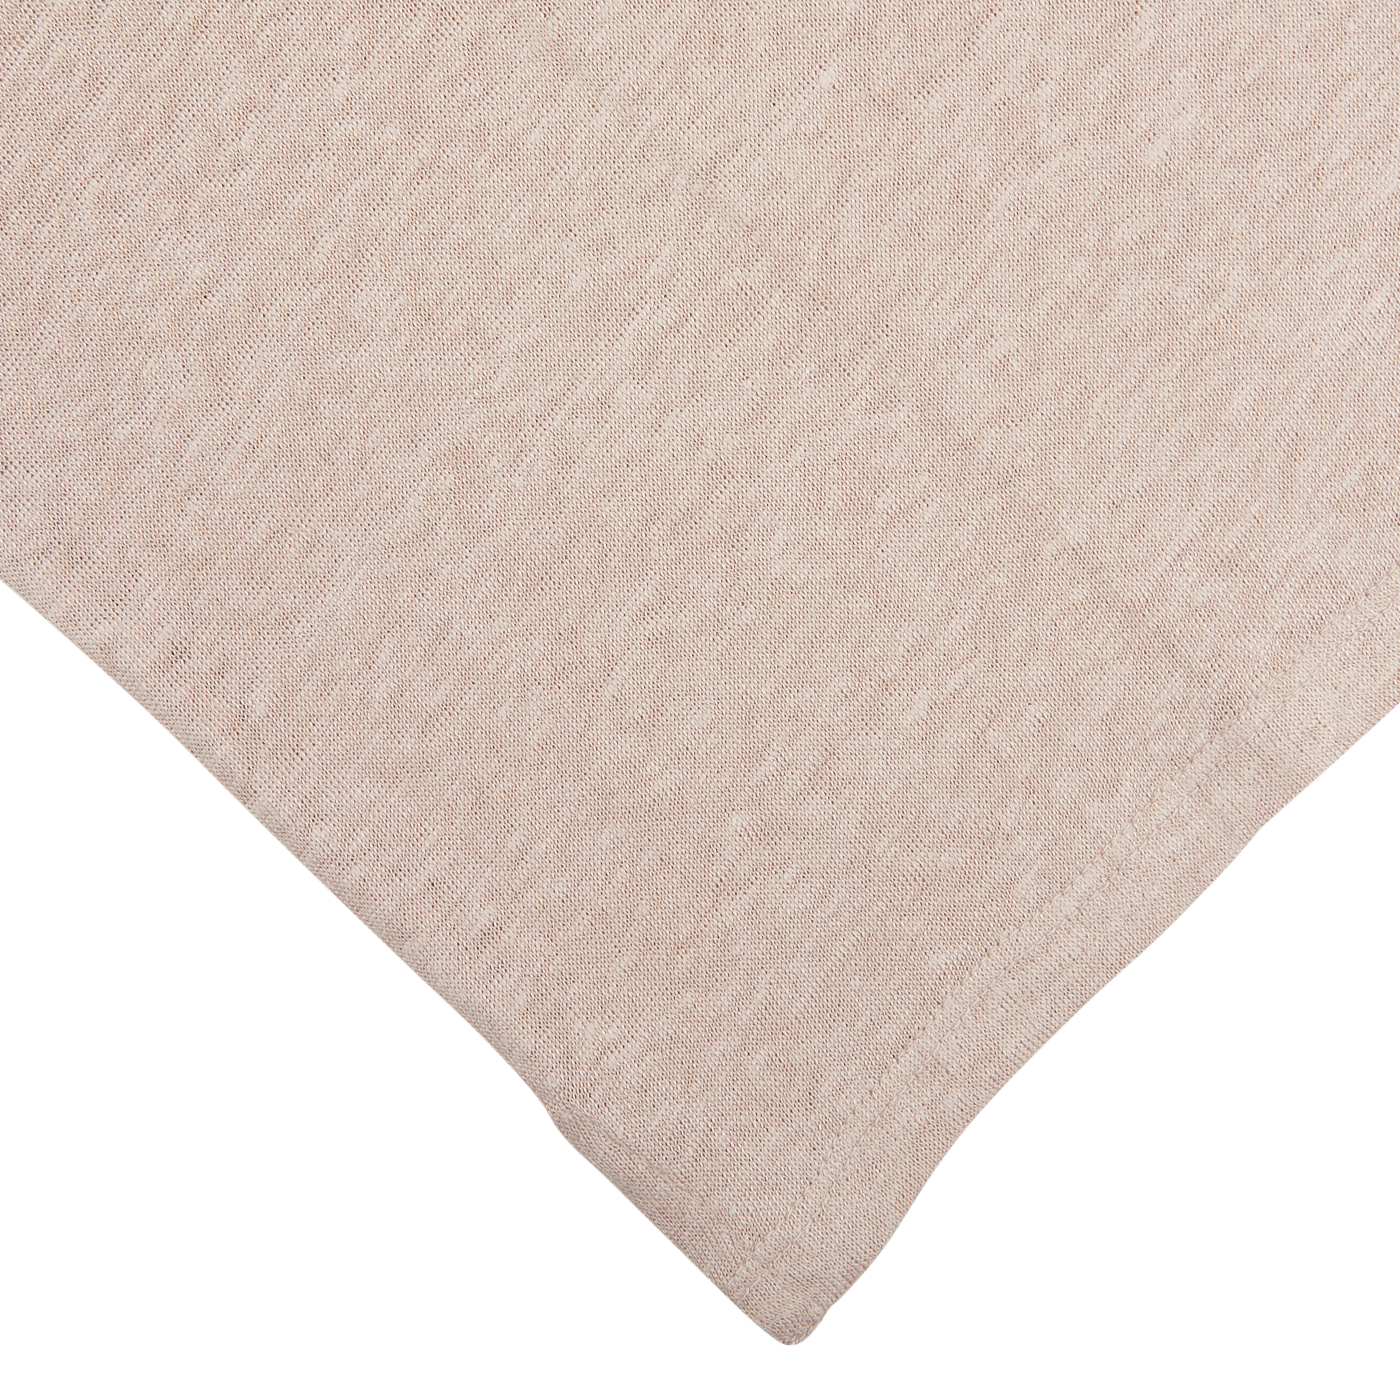 Close-up of a textured Paige Light Pink Linen Capri Collar Polo Shirt fabric with a corner folded over on a white background.